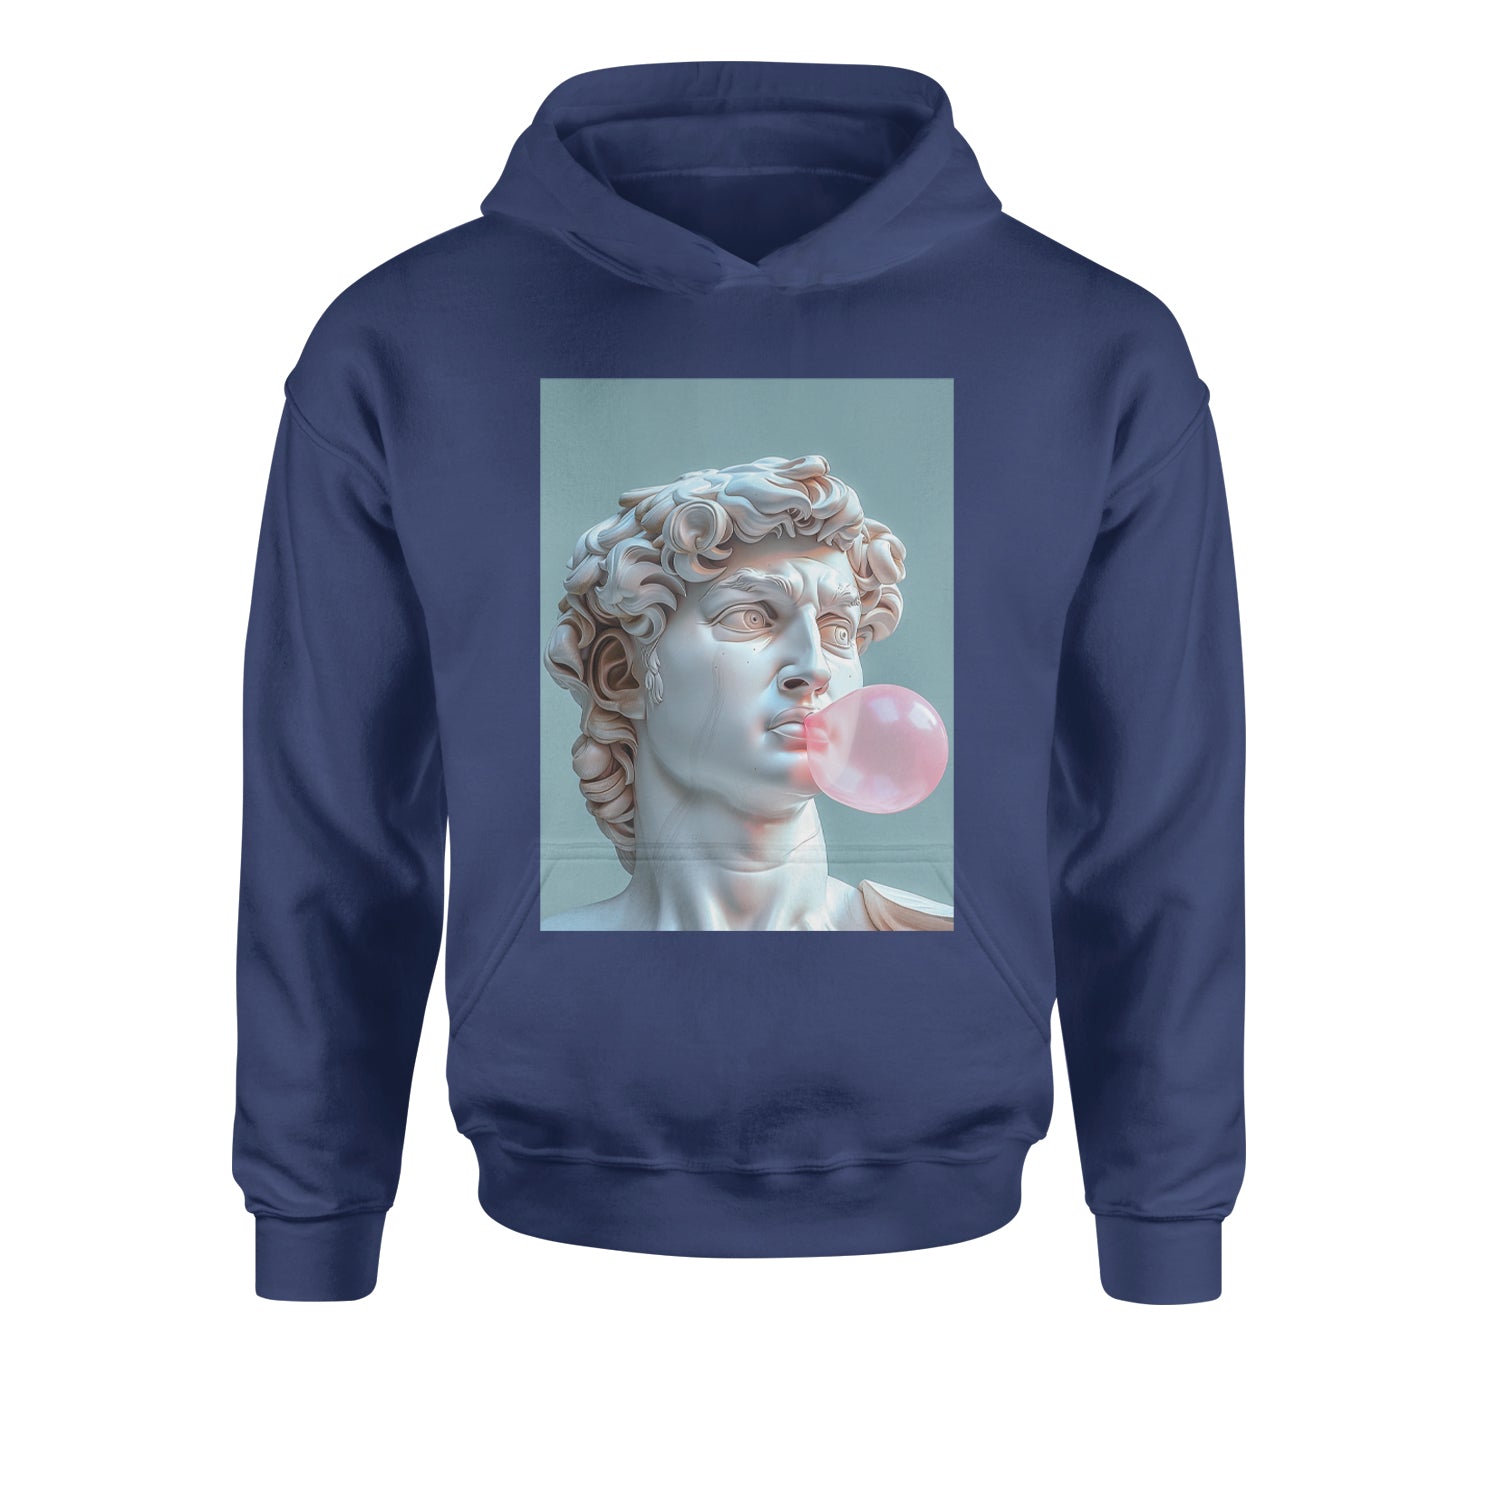 Michelangelo's David with Bubble Gum Contemporary Statue Art Youth-Sized Hoodie Navy Blue